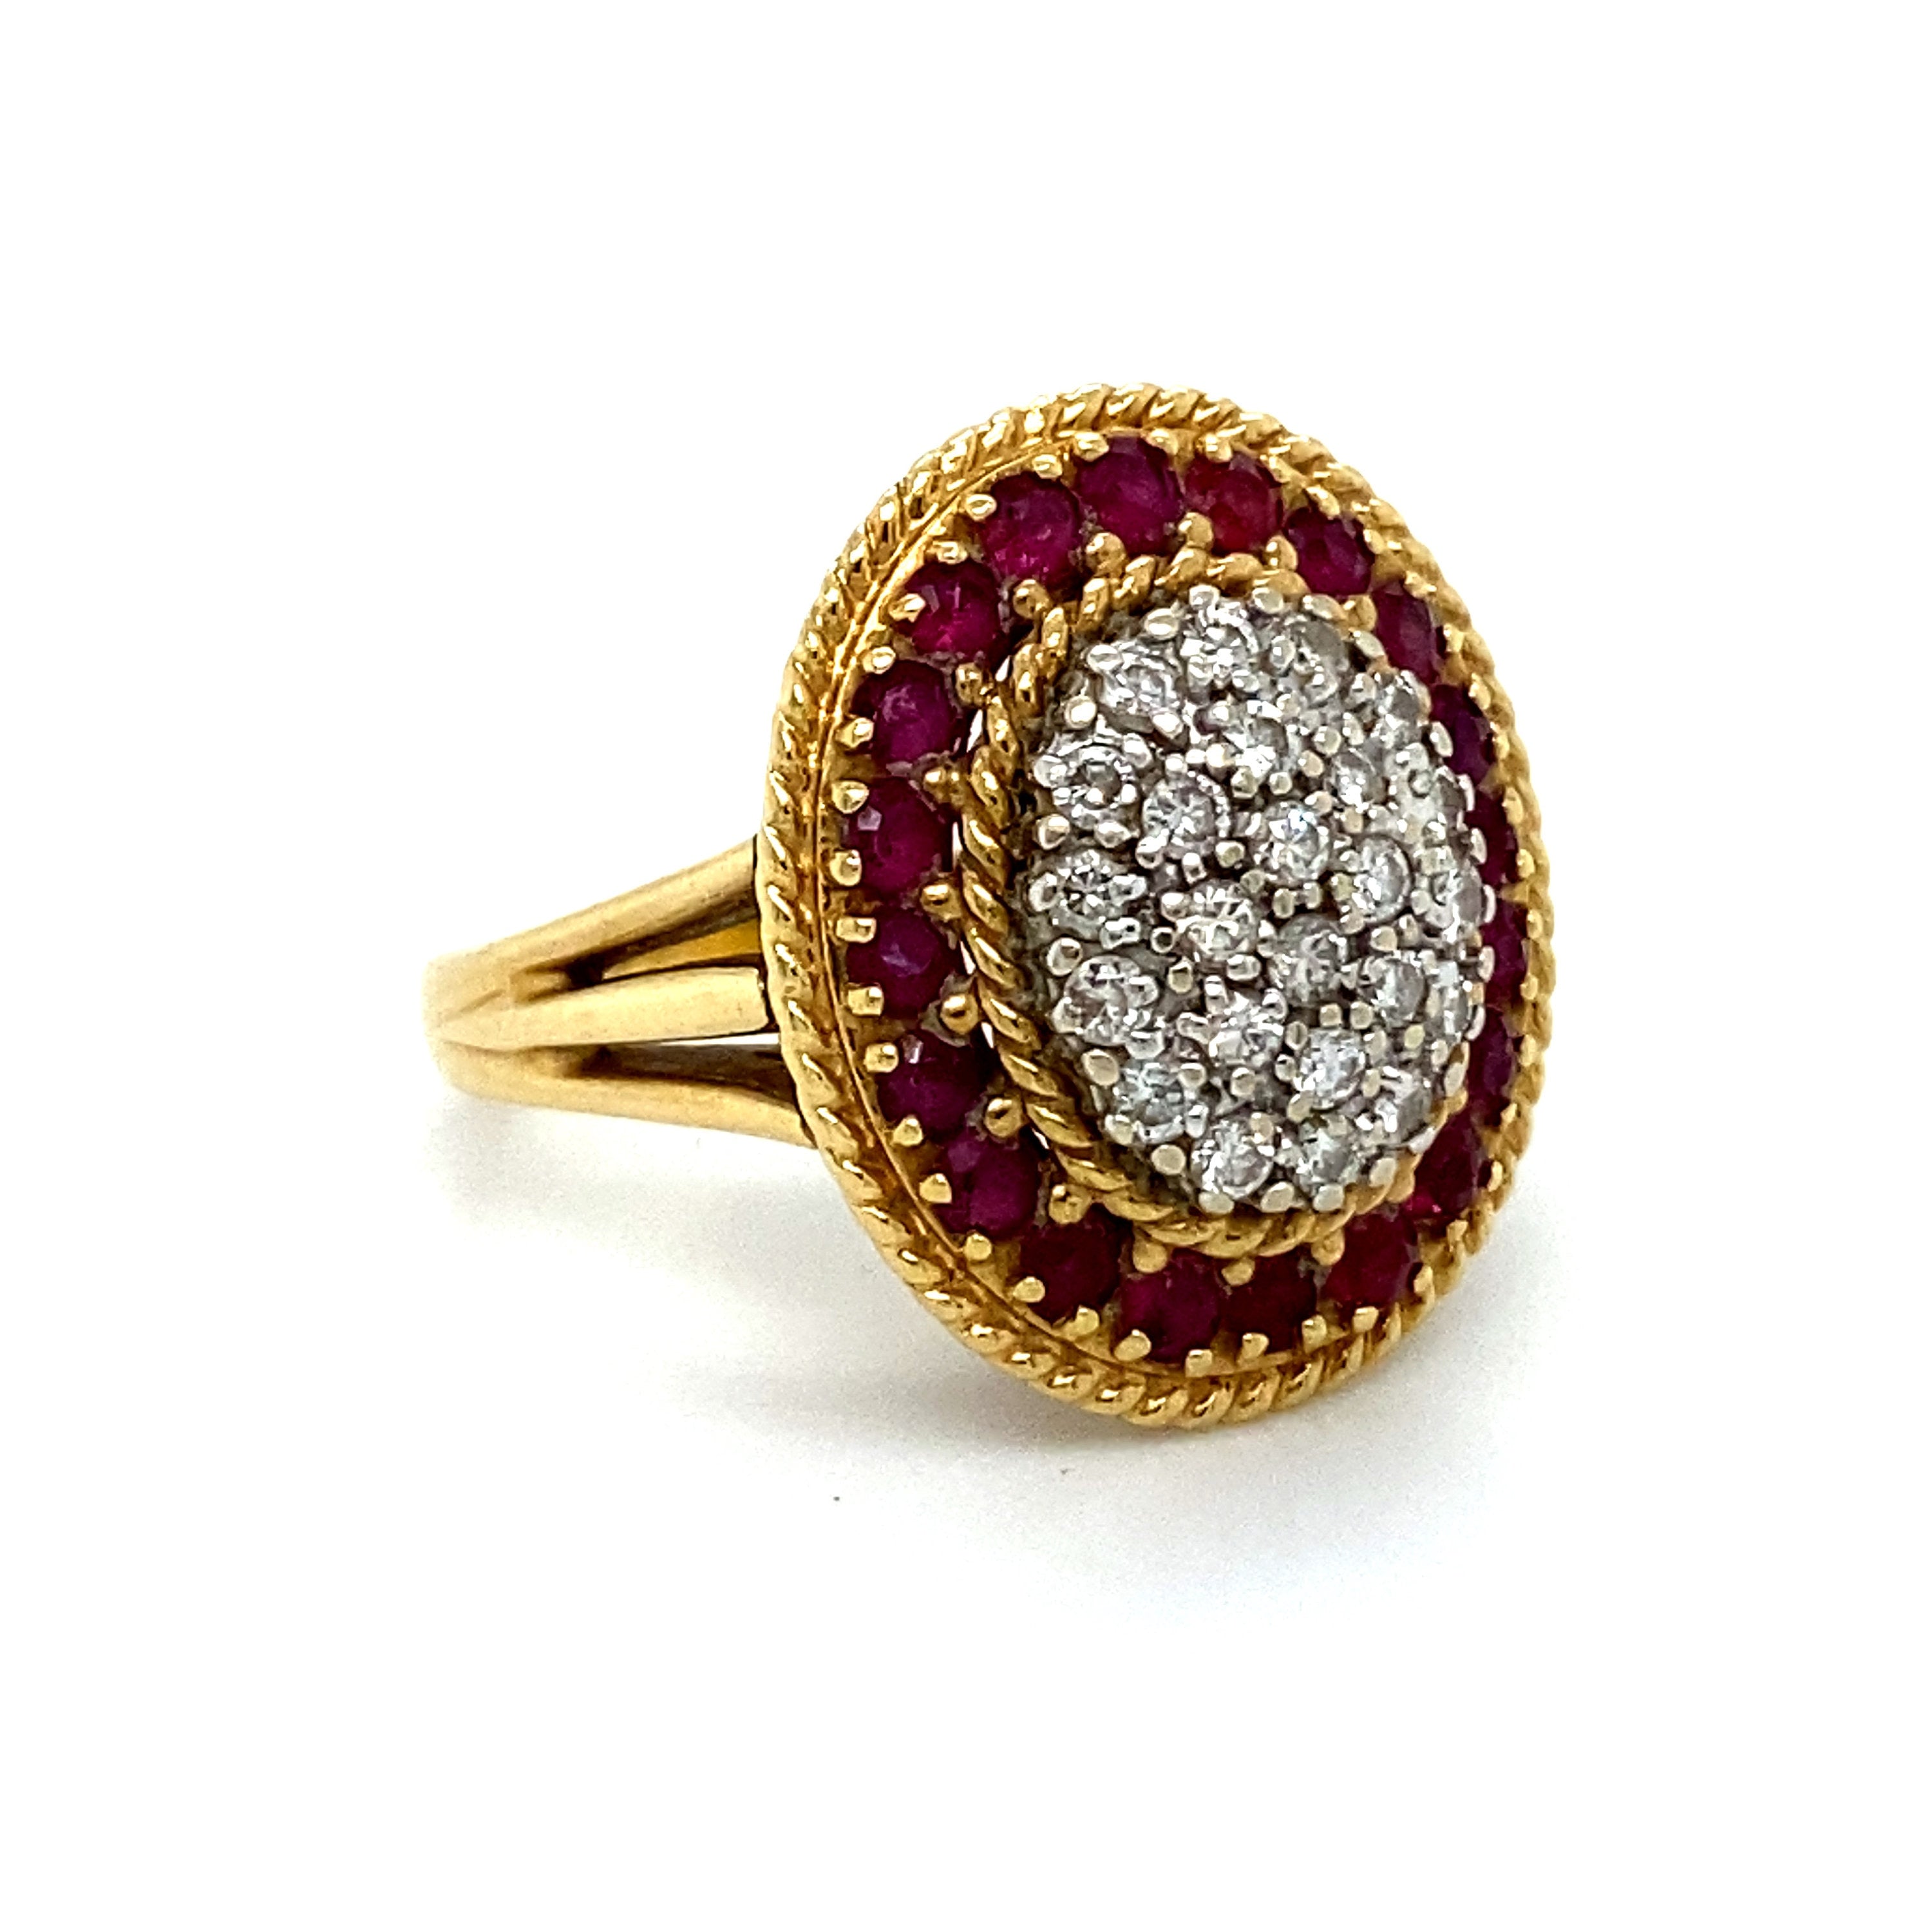 Vintage Diamond and Ruby Halo Ring Engagement Ring in 18K Yellow Gold - 1.72ct.